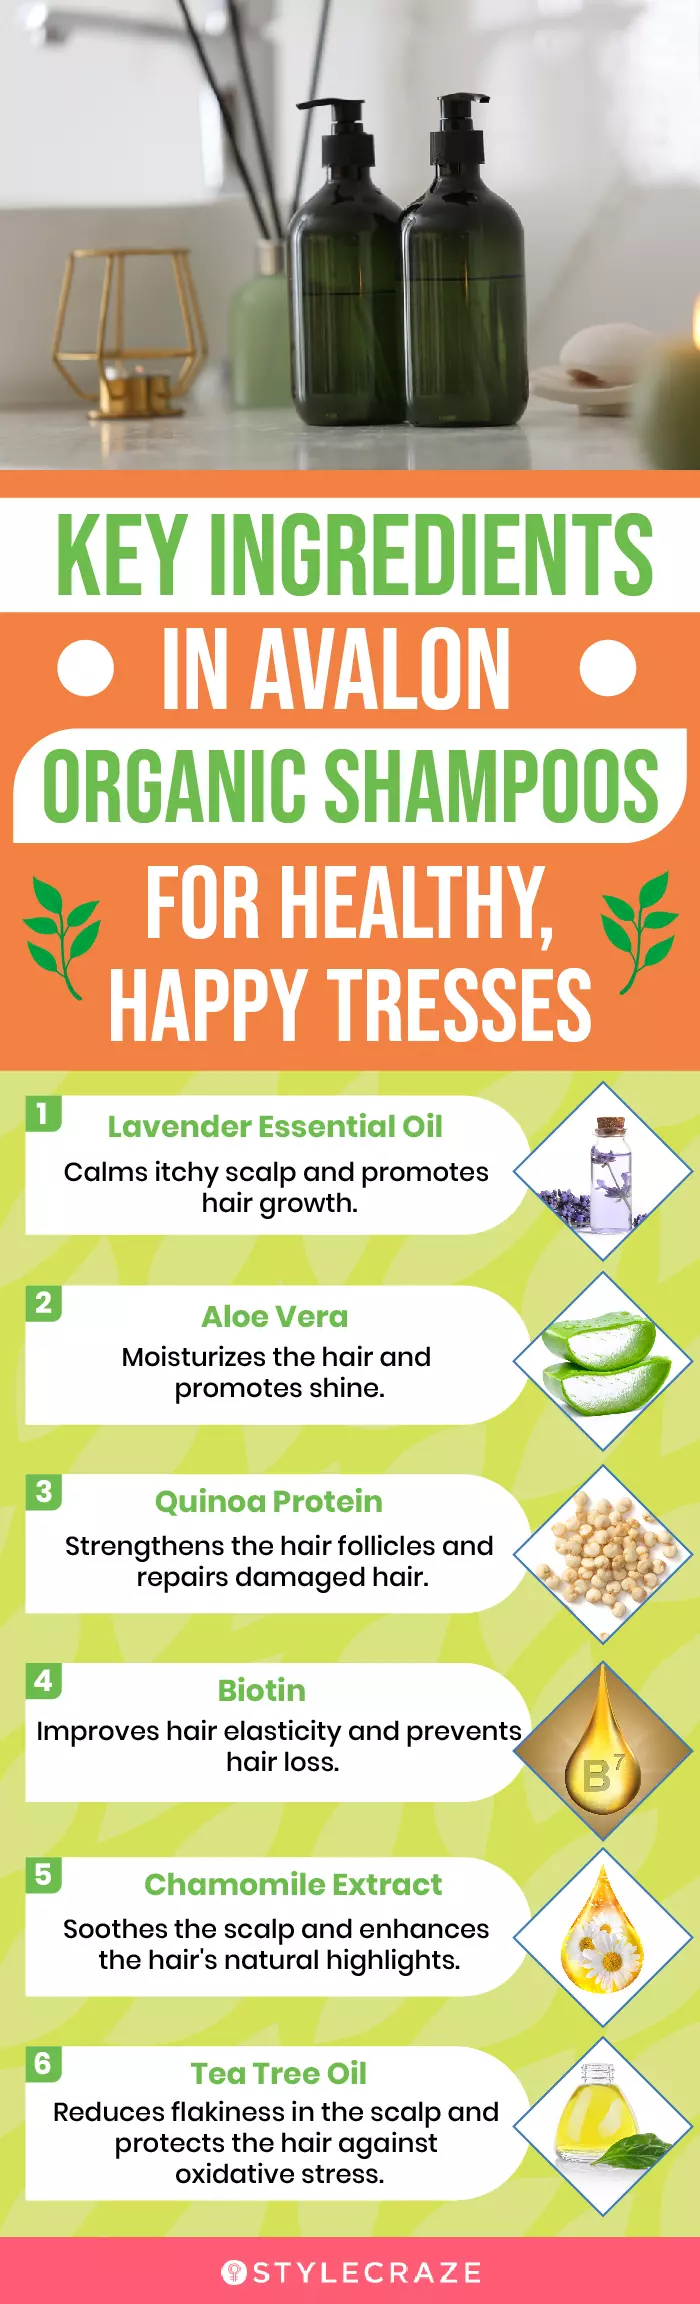 Key Ingredients In Avalon Organic Shampoos For Healthy, Happy Tresses (infographic)